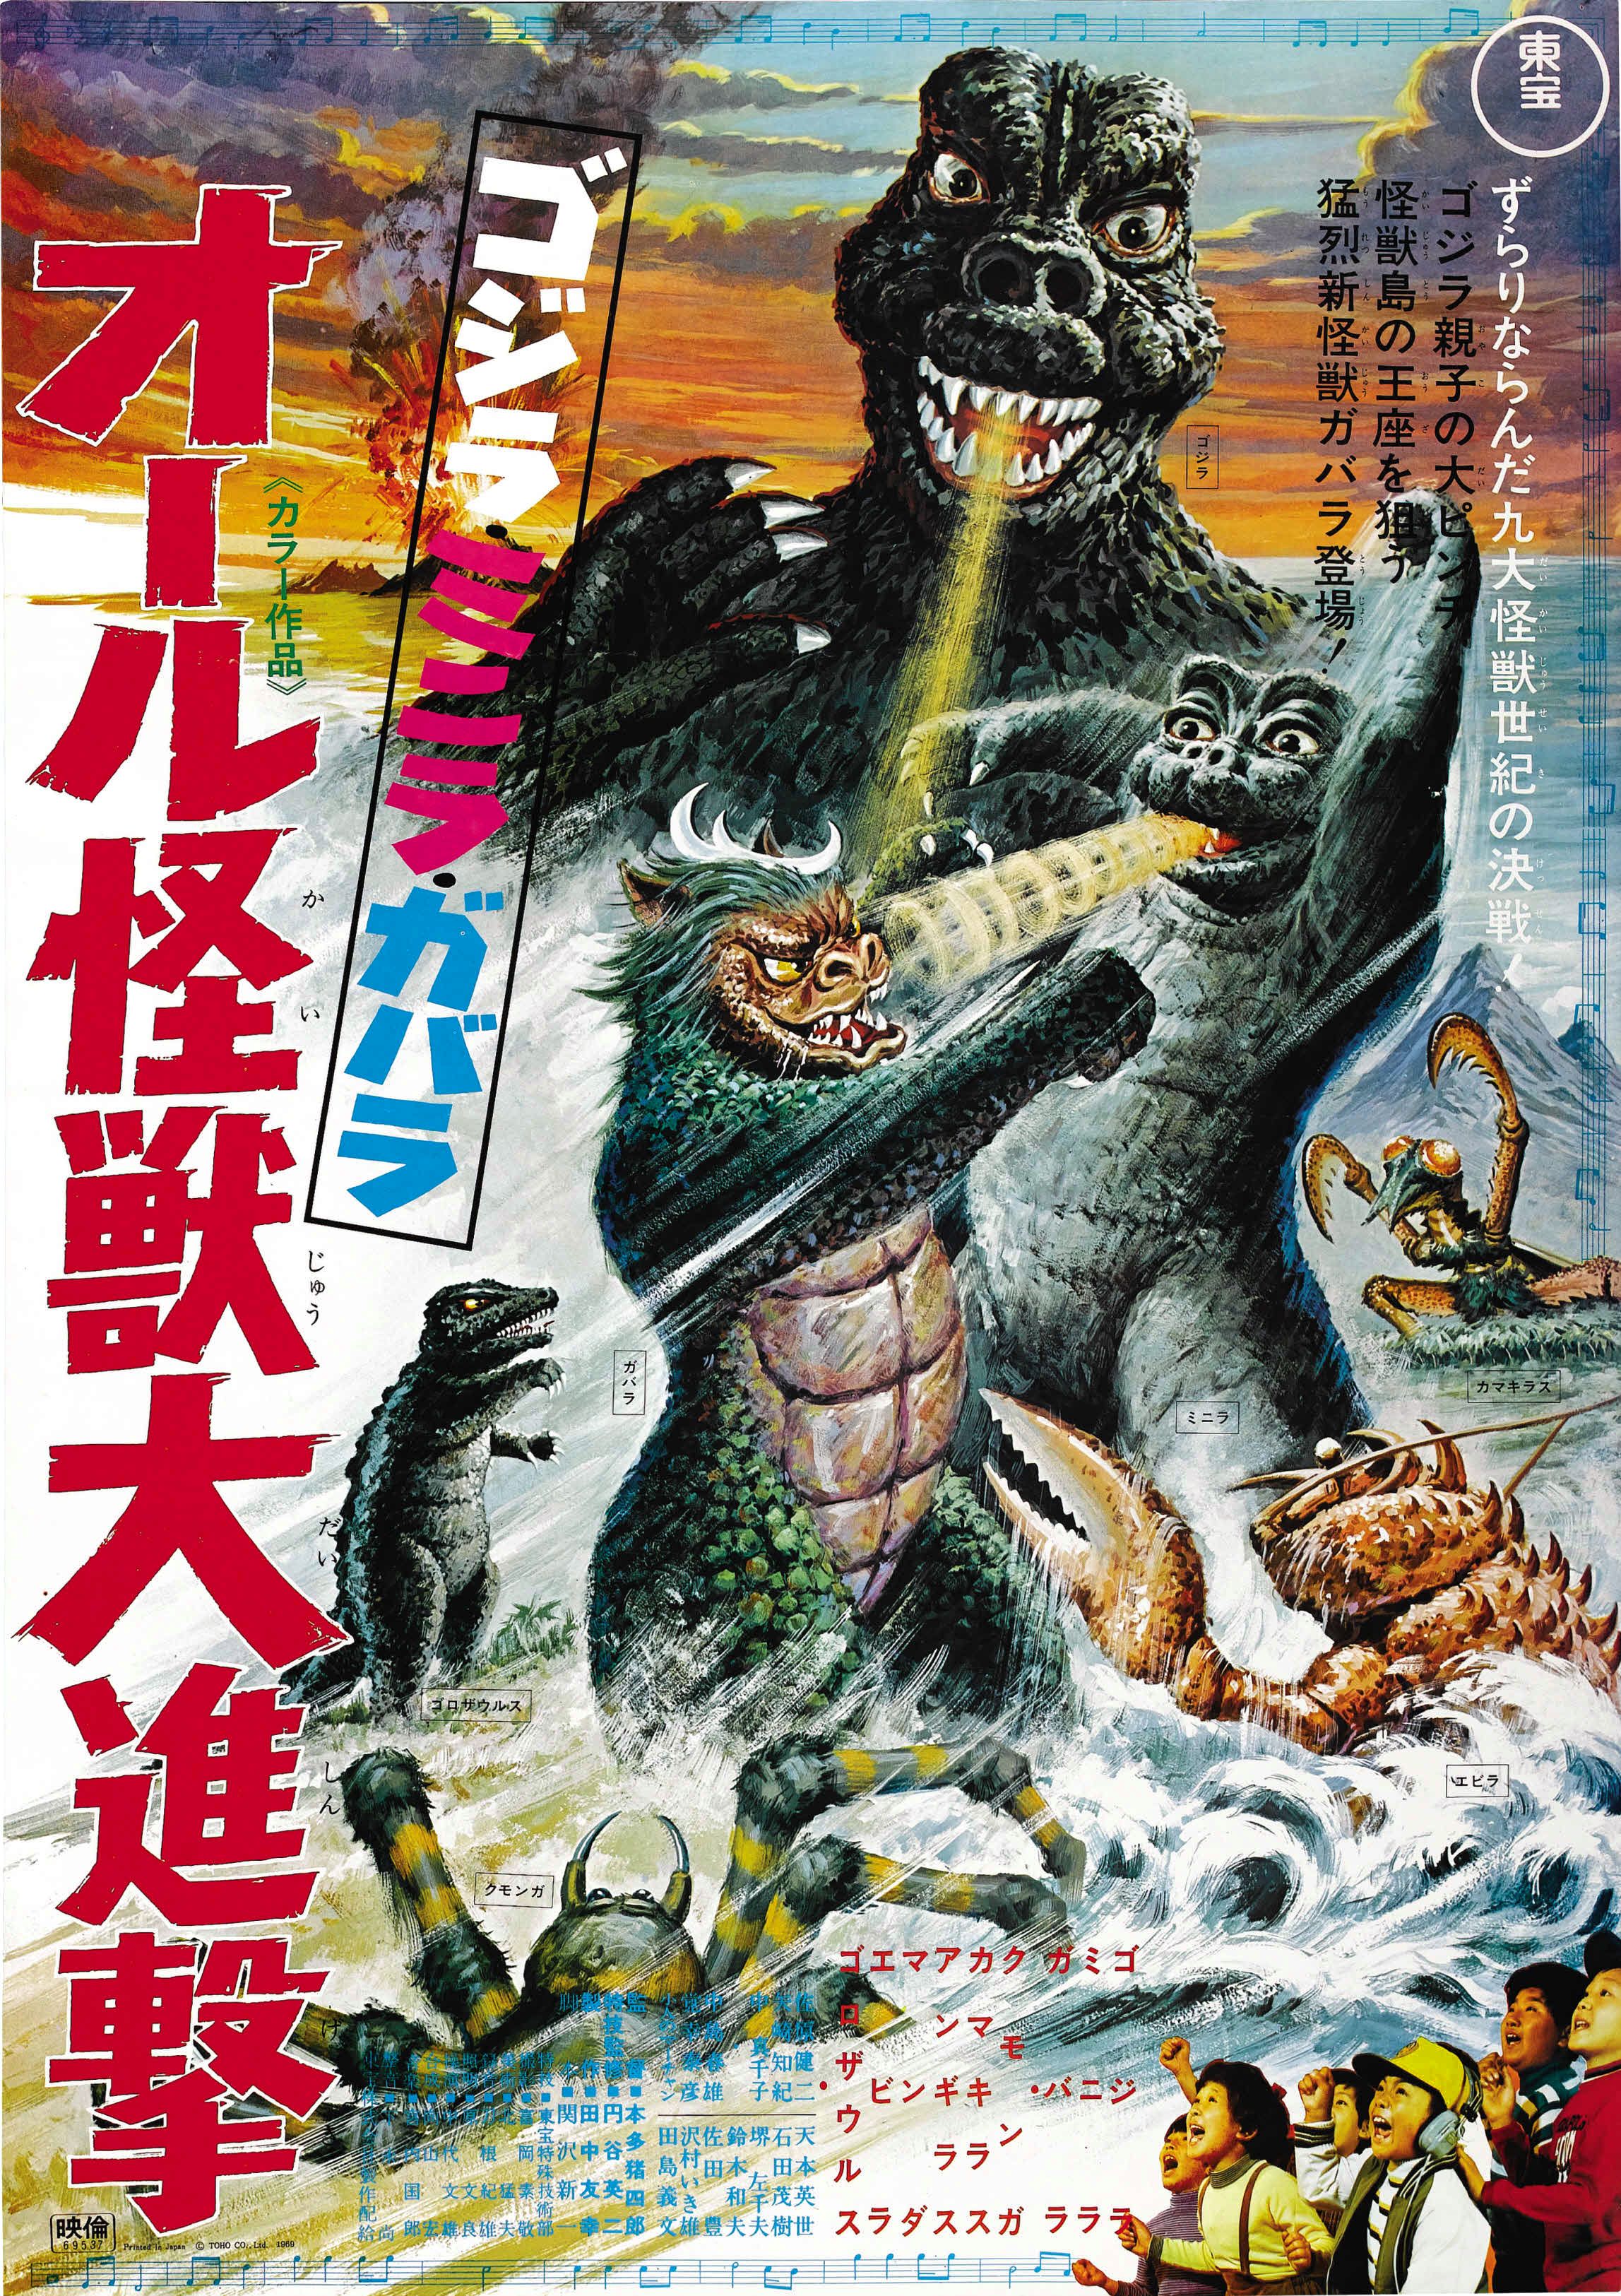 Category:Images, Official Kaiju Paradise Wiki